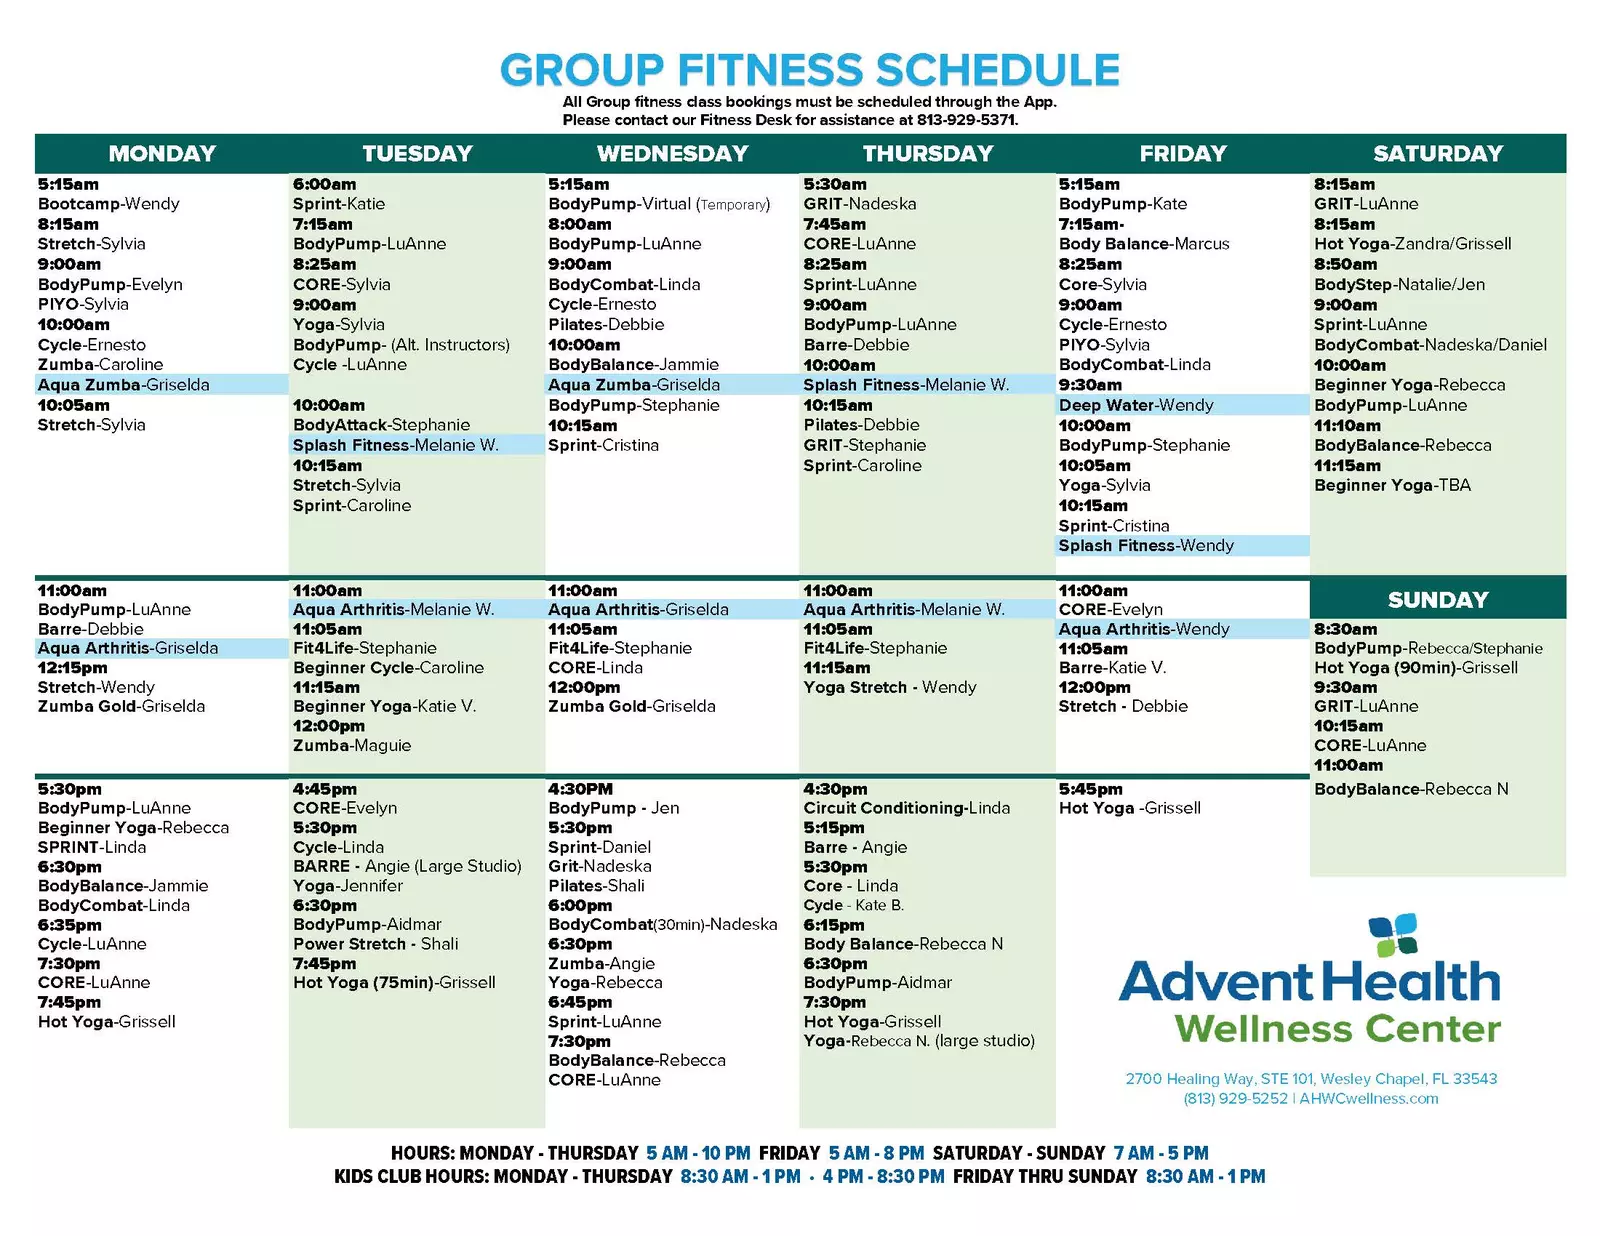 Facilities & Group Schedule